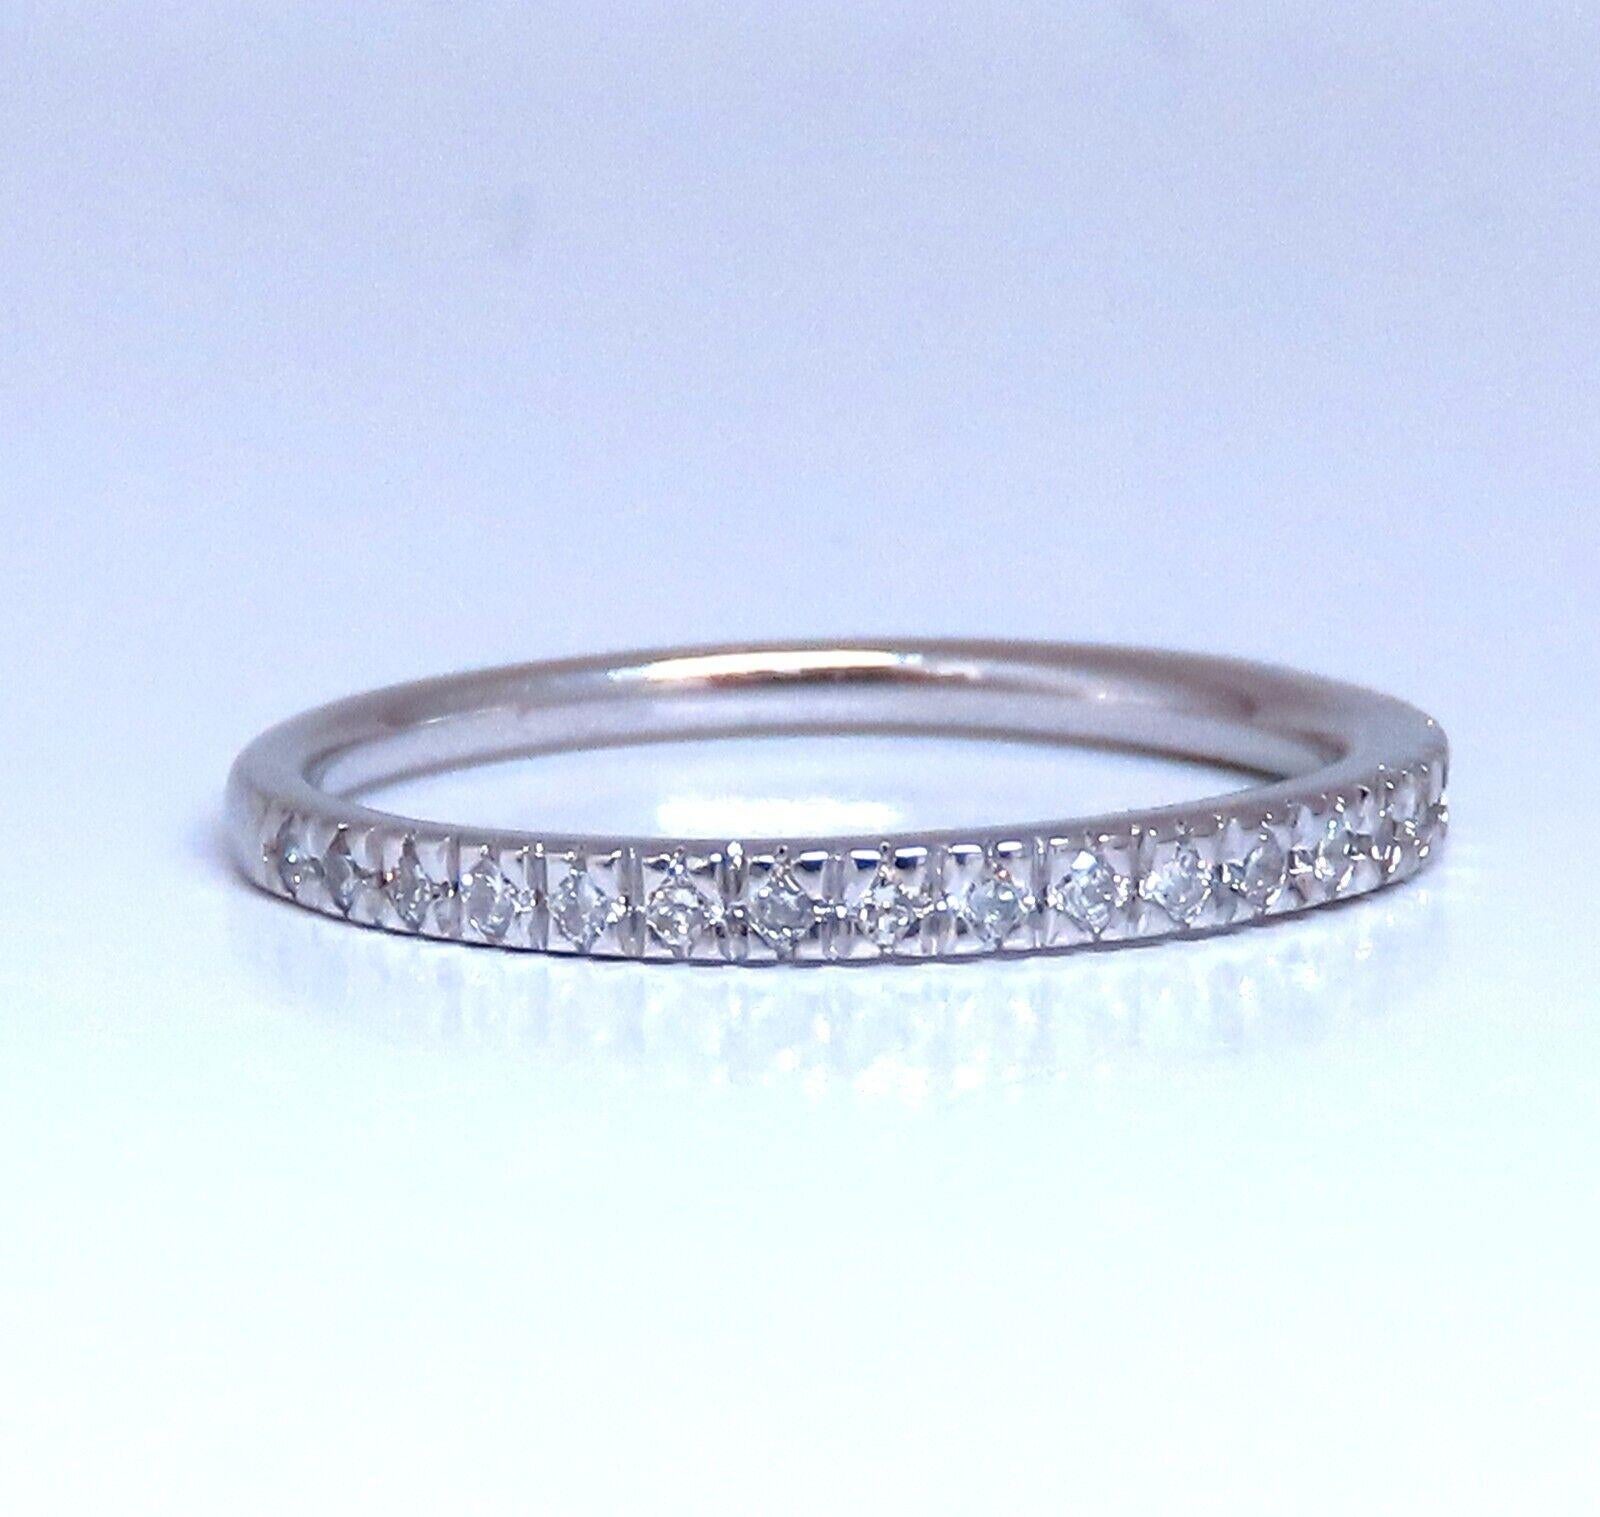 .18ct Natural Round Cut Diamond Ring

Vs2 clarity H color.

14kt white gold

1.5 Grams

Depth: 1.8mm

Current ring size: 6.25

May professionally resize, please inquire.